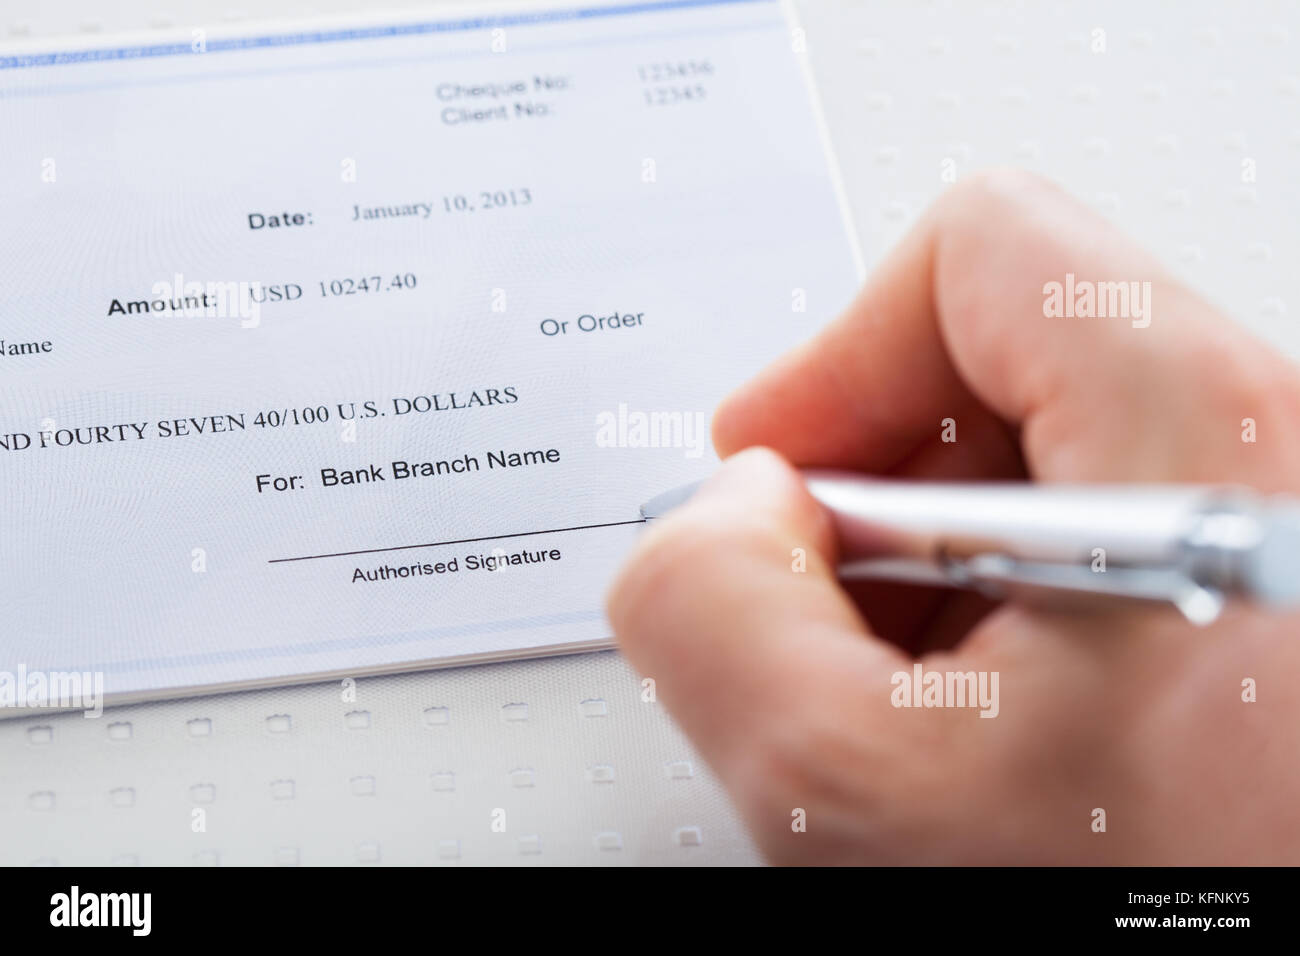 Cheque Book Signature High Resolution Stock Photography and Images